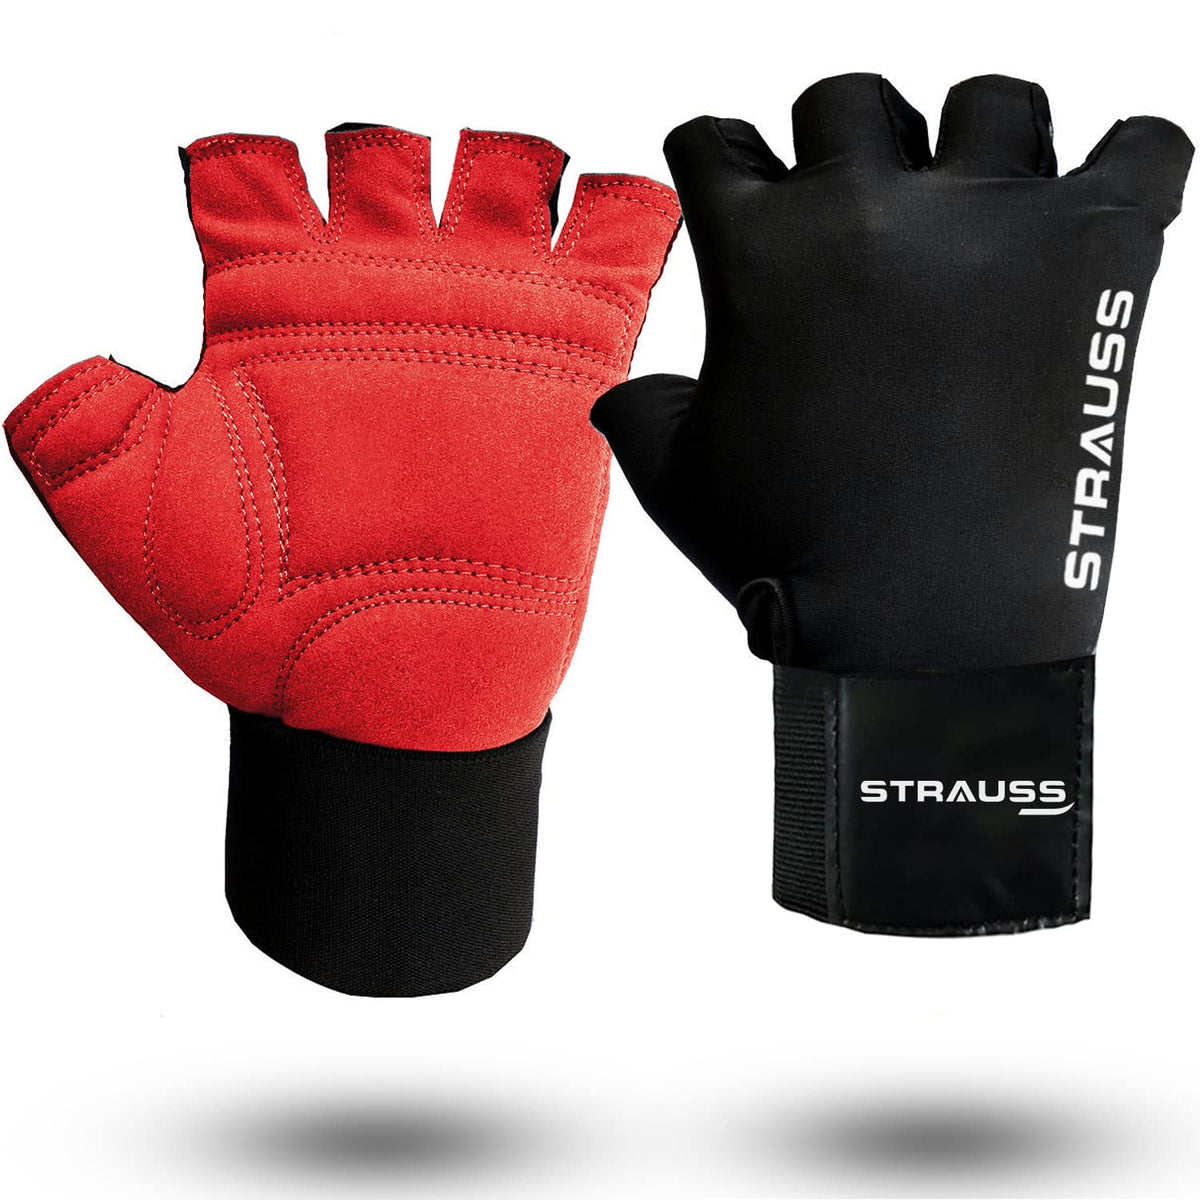 STRAUSS Suede Gym Gloves for Weightlifting, Training, Cycling, Exercise & Gym | Half Finger Design, 8mm Foam Cushioning, Anti-Slip & Breathable Lycra Material, (Red/Black), (Small)